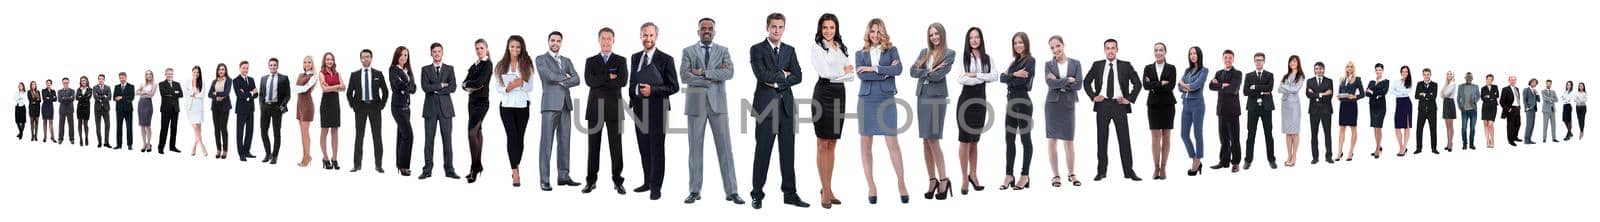 leader and professional business team standing together.isolated on white background.